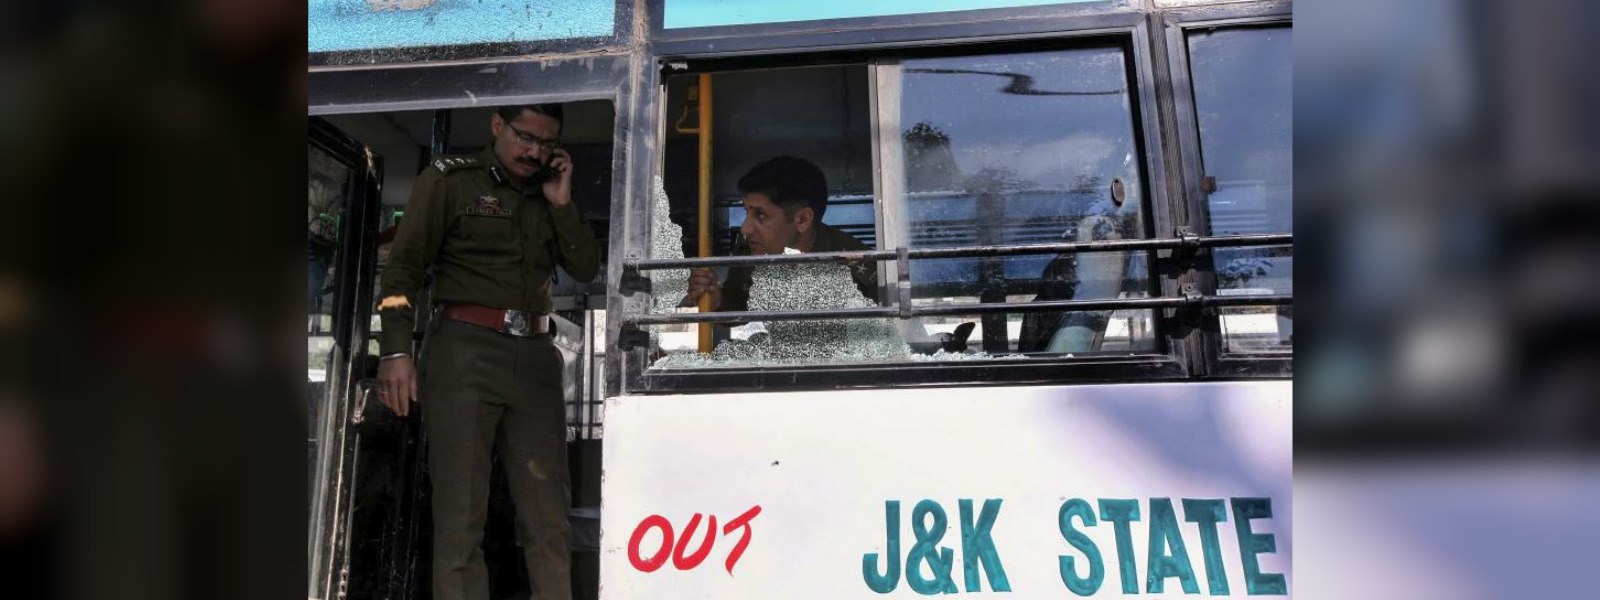 Blast in Jammu and Kashmir wounds at least 18